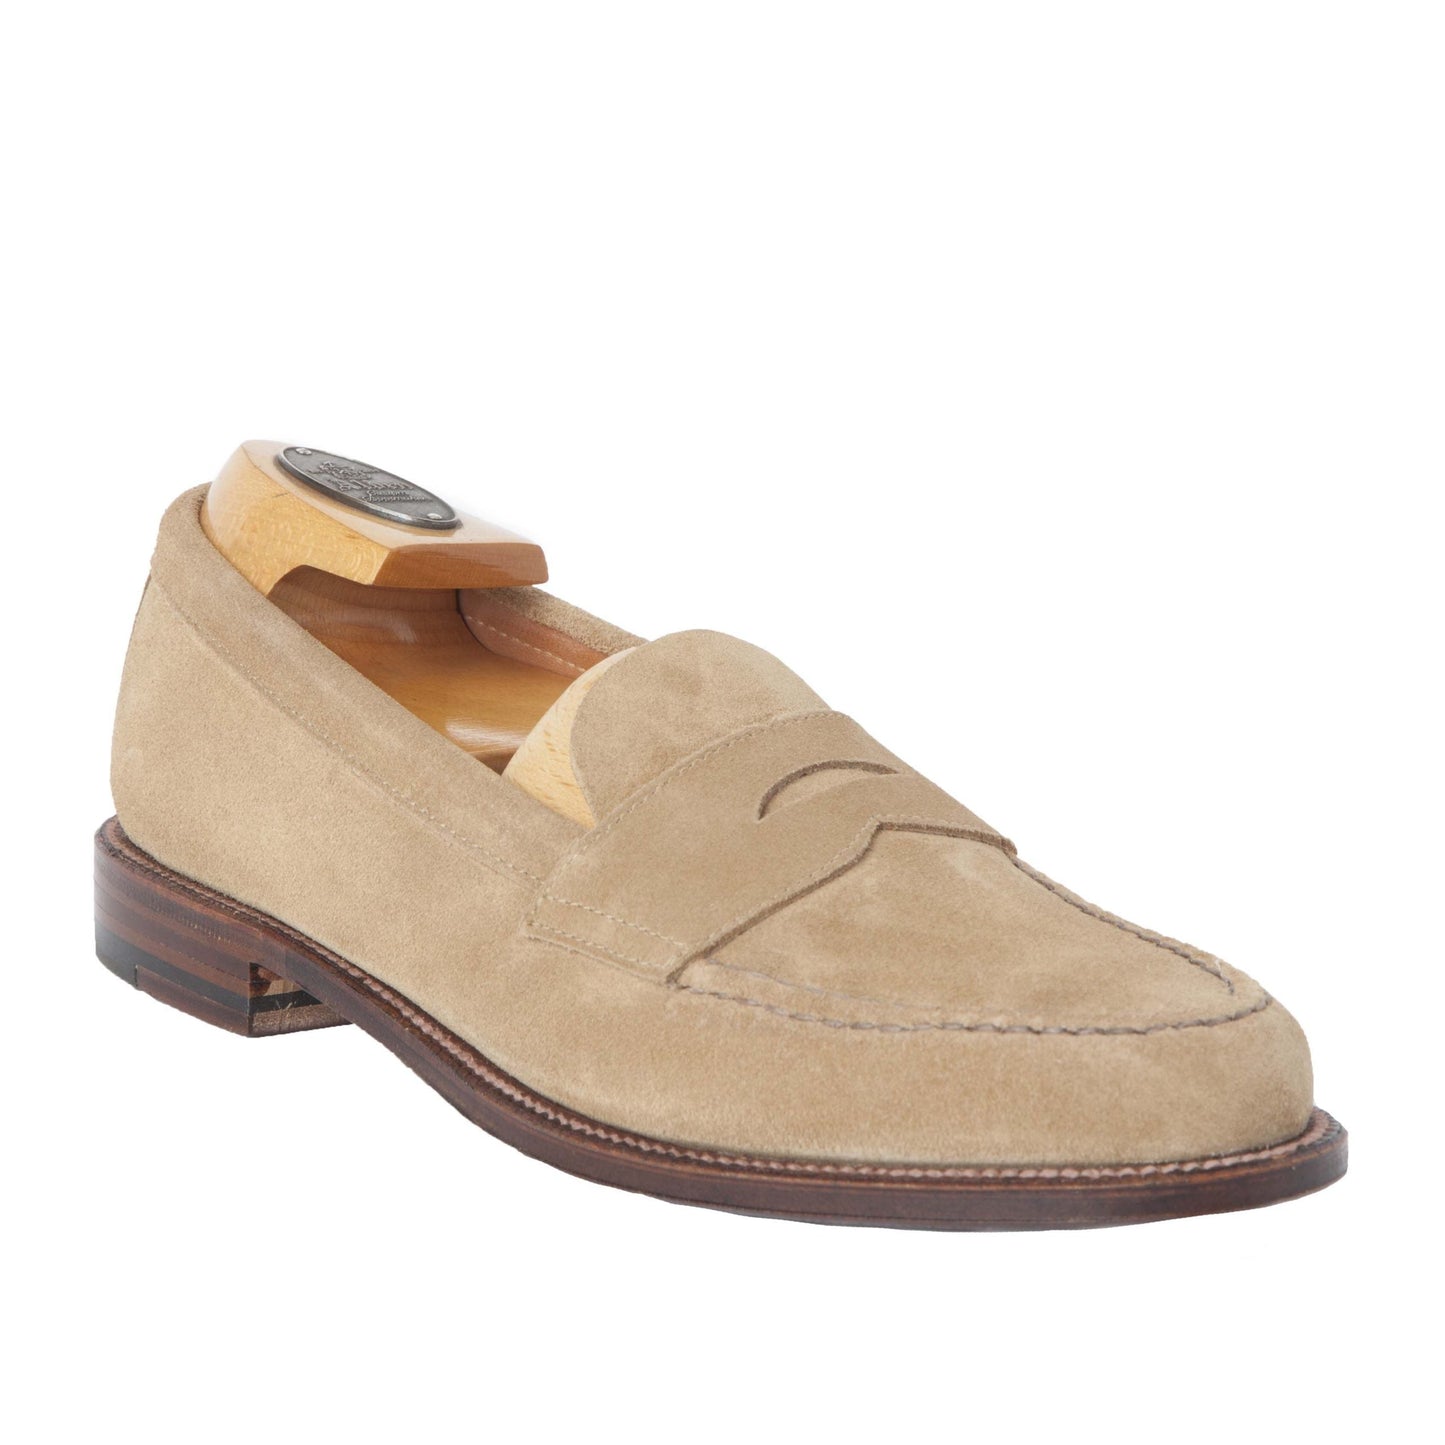 6244F - Unlined Leisure Hand Sewn in Tan Suede